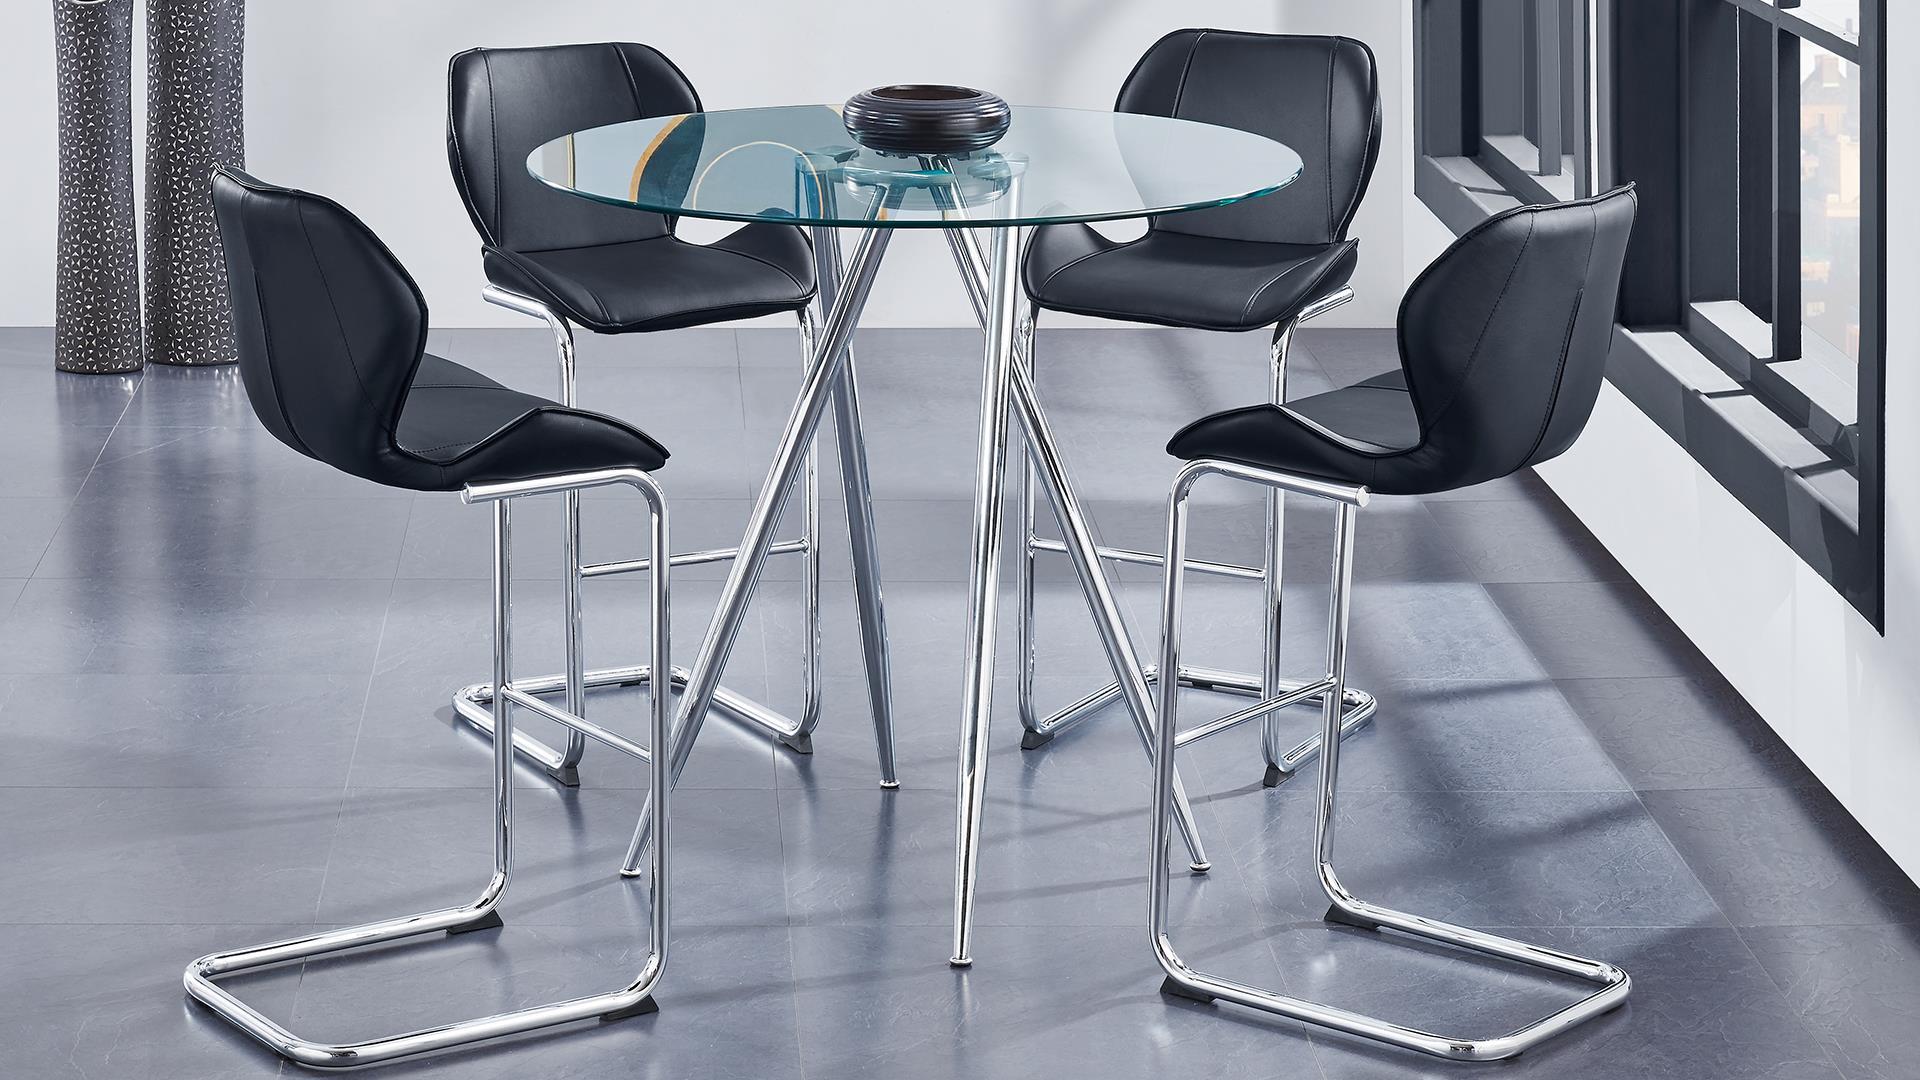 Contemporary Bar Set D1503BT / D1446BS-BL D1503BT + D1446BS-BL-Set-5 in Clear, Silver, Black Faux Leather